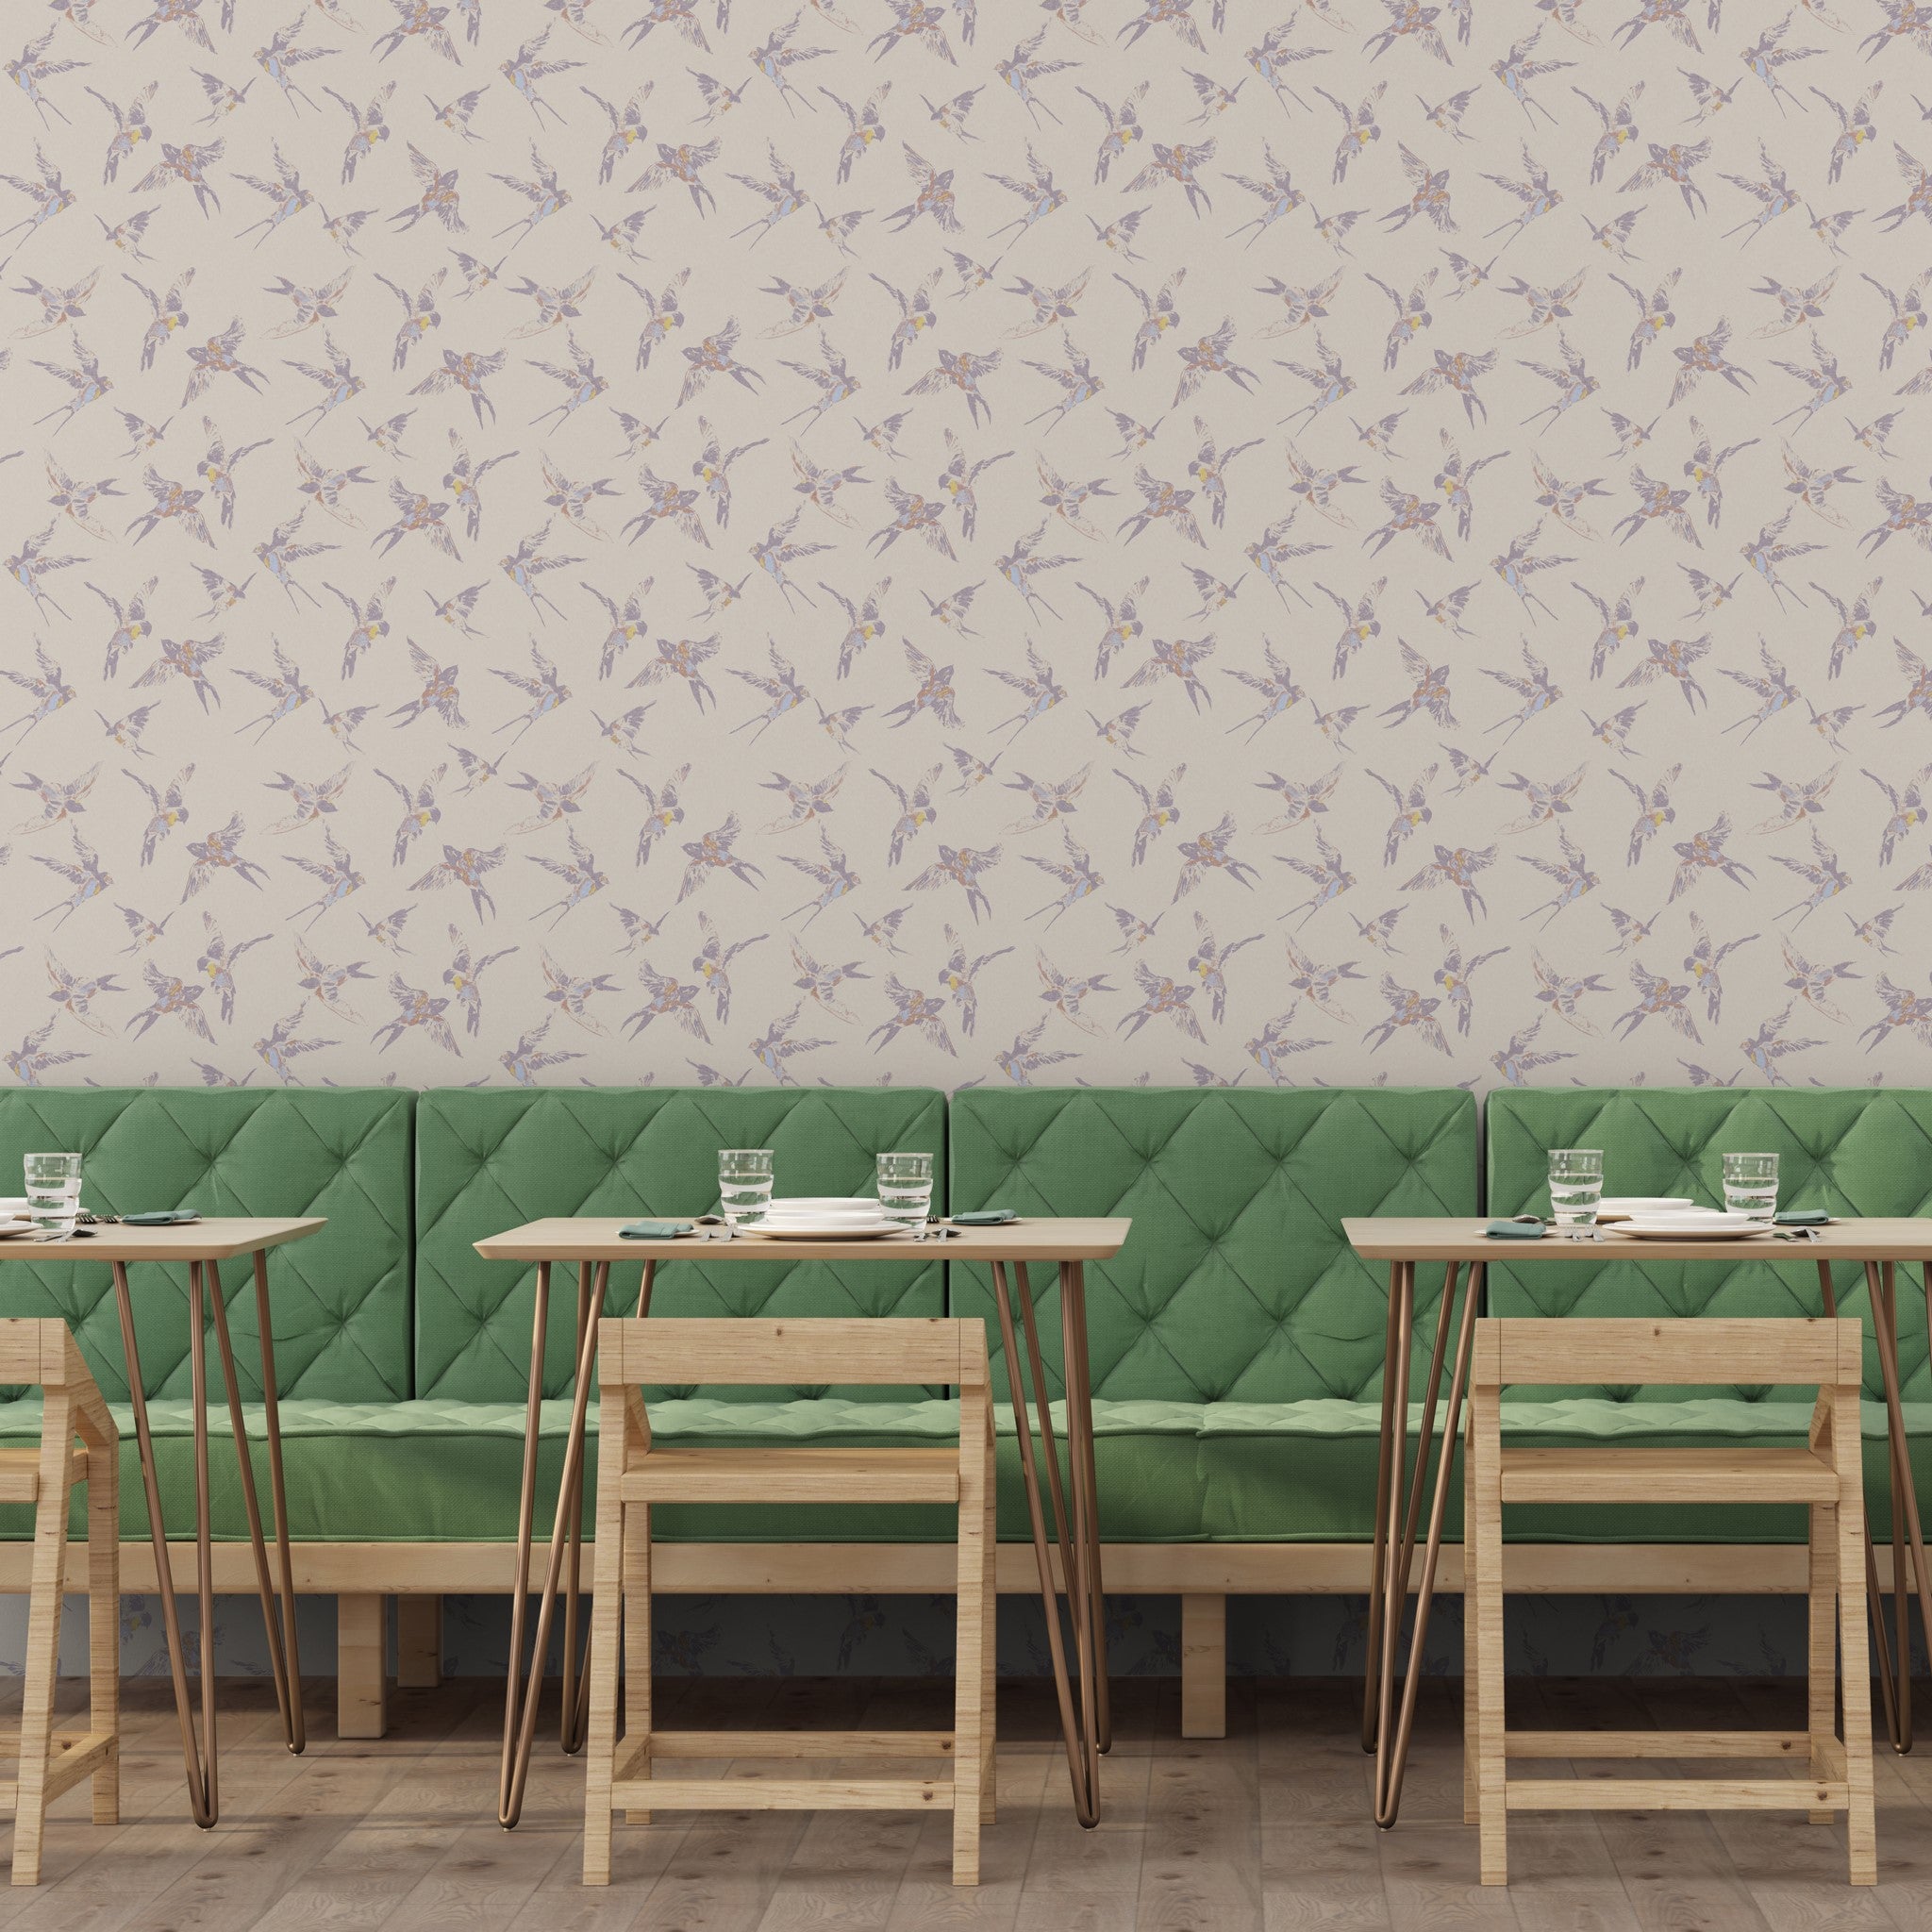 "The Cheery Wallpaper by Wall Blush in a modern dining room, featuring elegant bird patterns as the focal point."